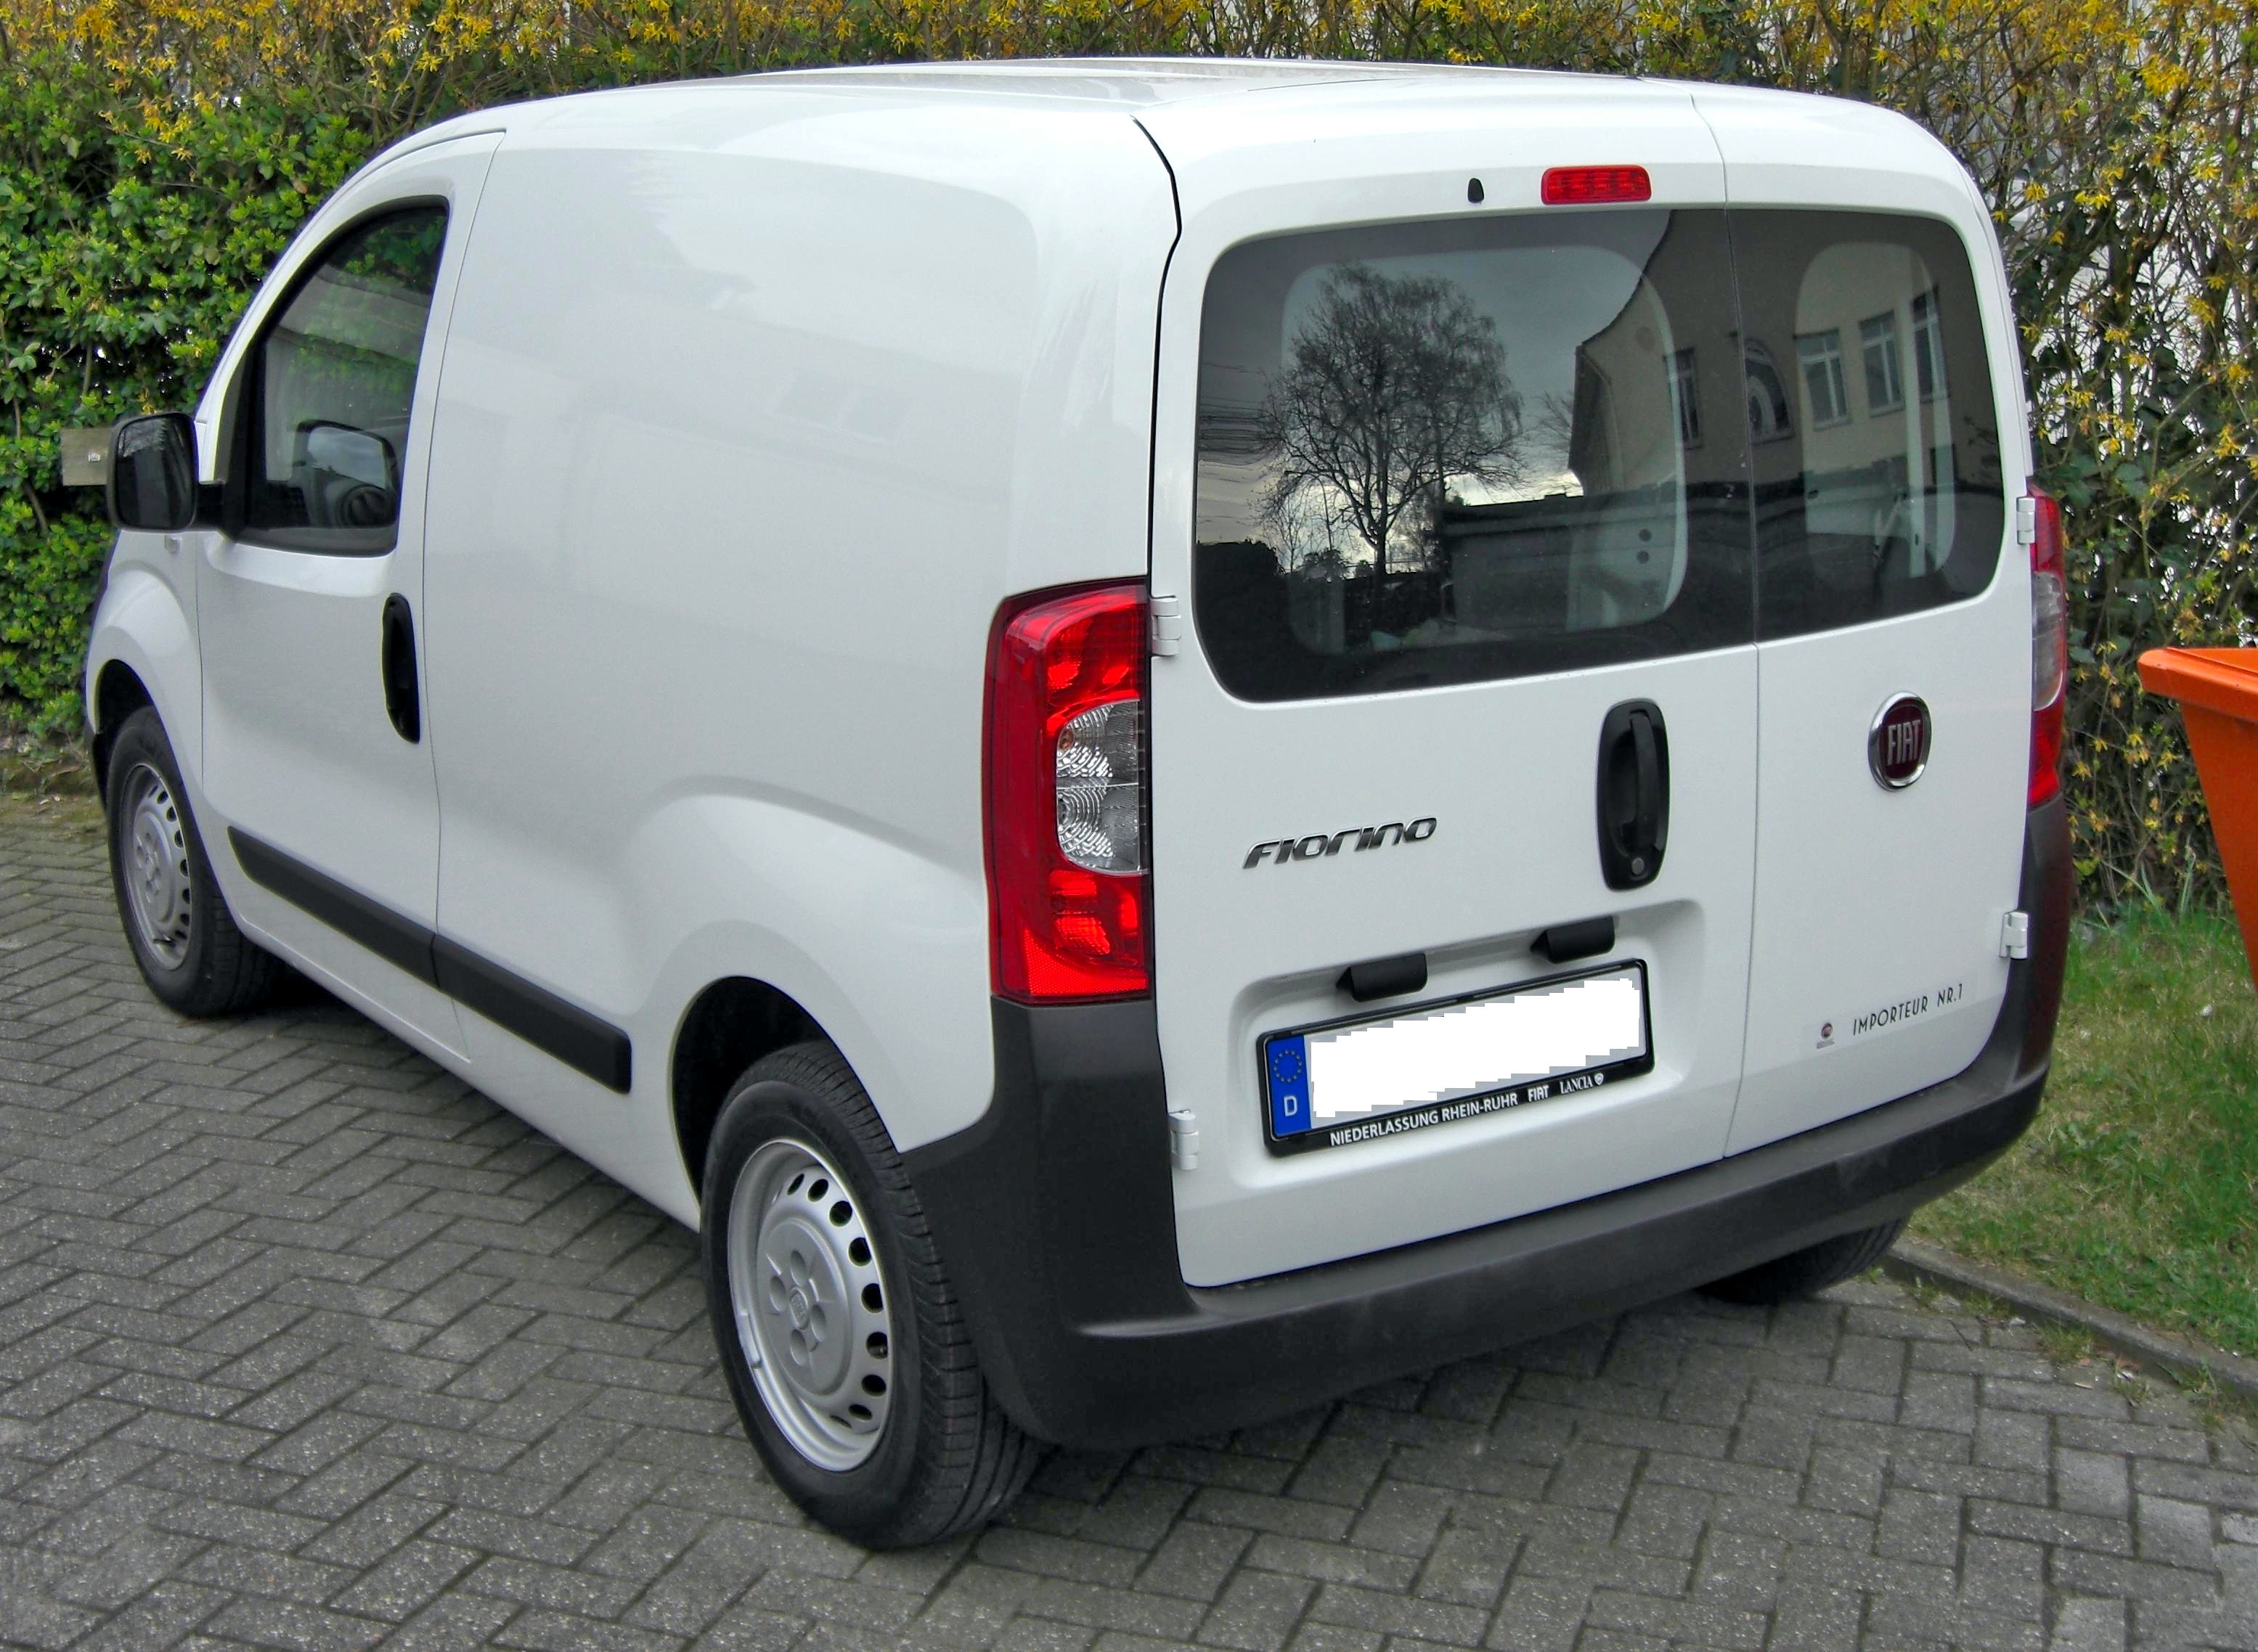 Fiat Qubo hd specifications